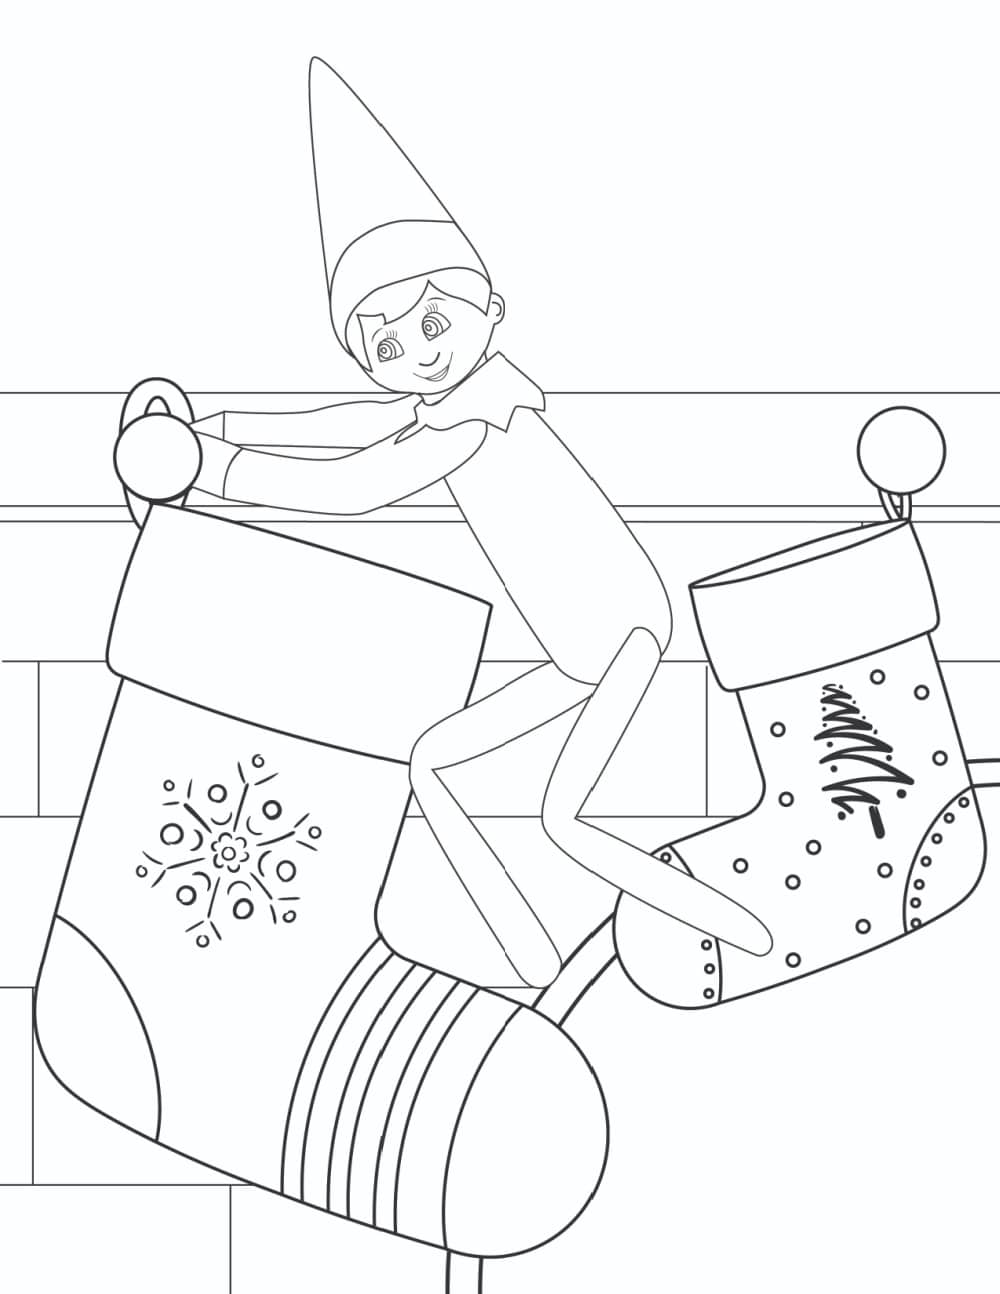 Printable elf on the shelf coloring pages